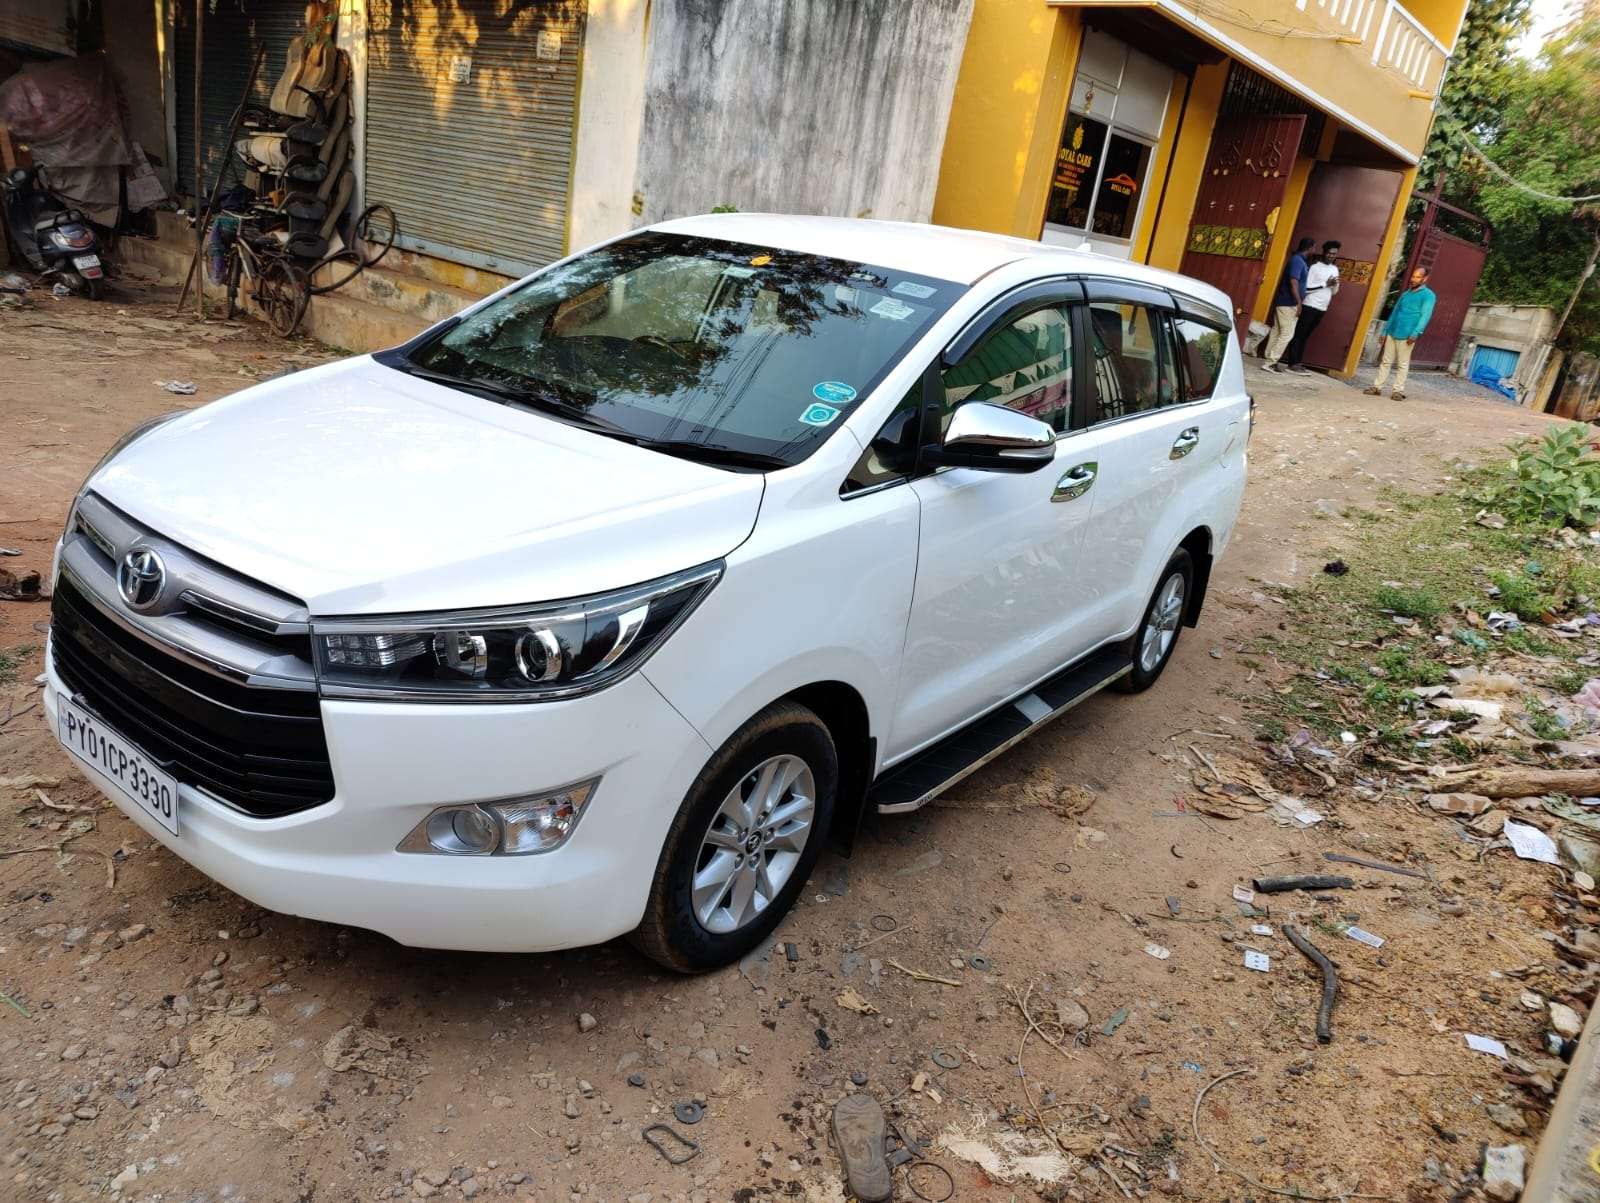 3077-for-sale-Toyota-Innova-Crysta-Diesel-Second-Owner-2017-PY-registered-rs-1750000